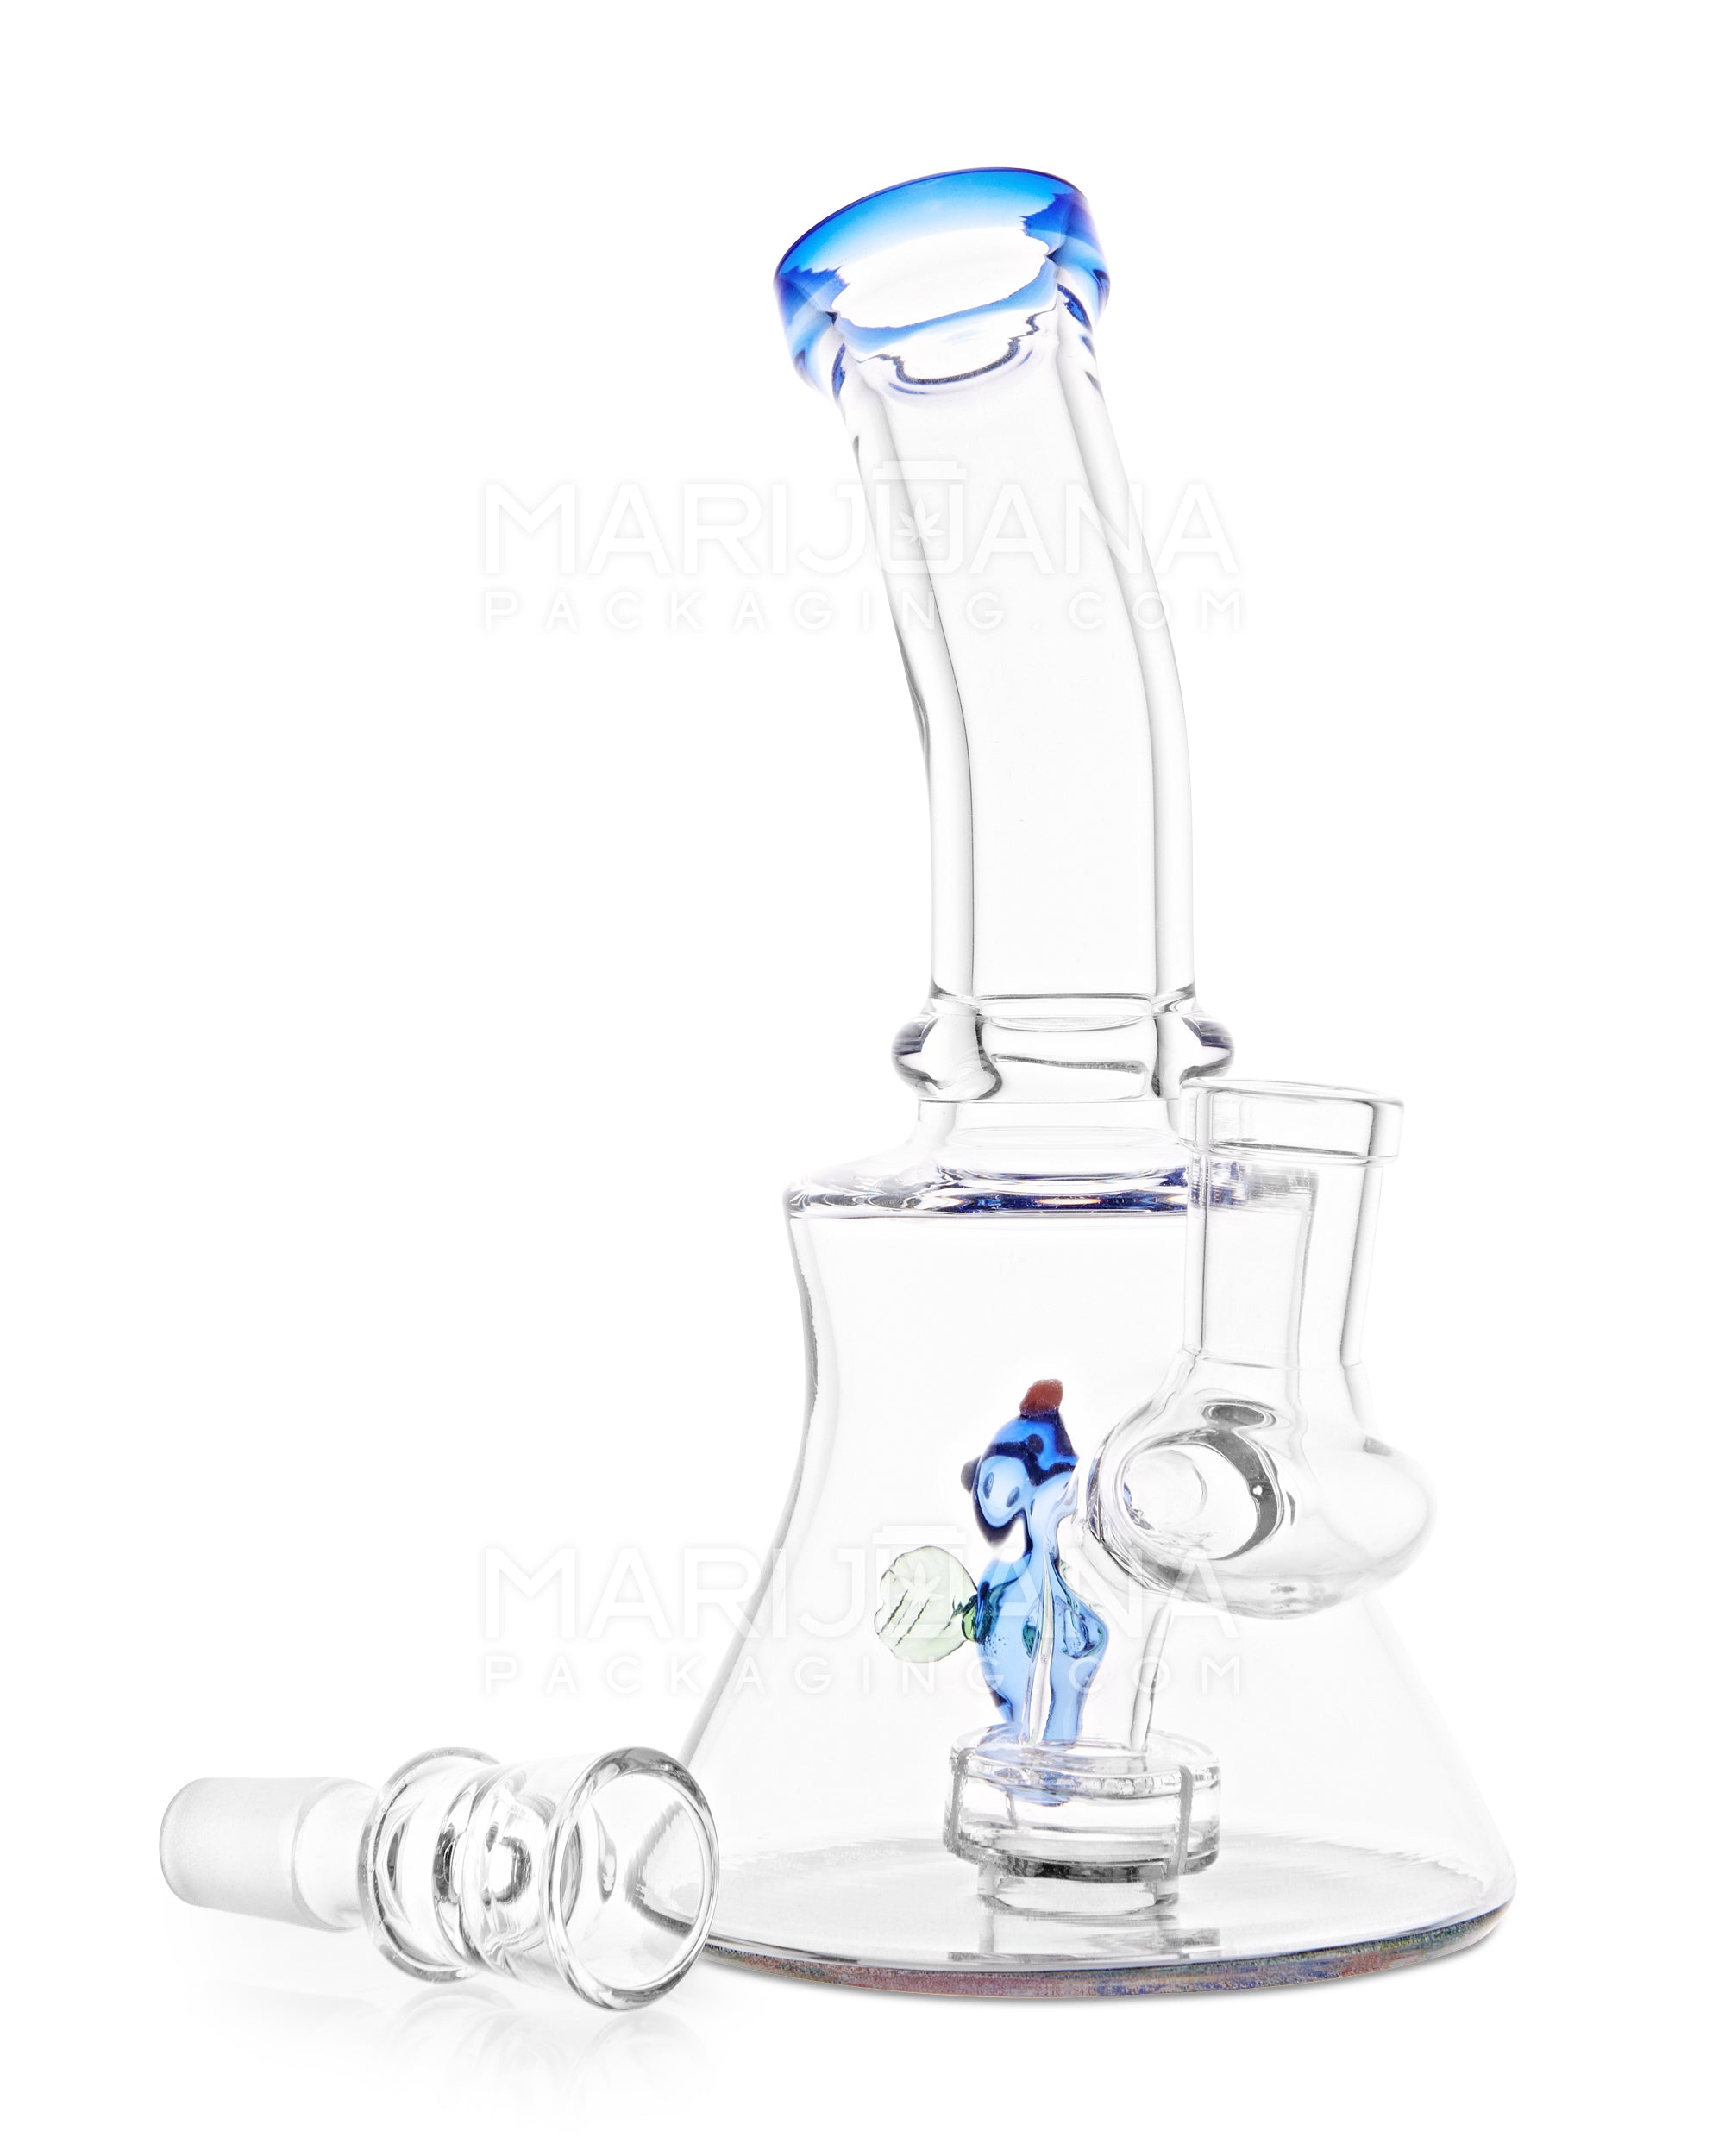 Bent Neck R&M Bee Showerhead Perc Glass Water Pipe w/ Base Decals | 7in Tall - 14mm Bowl - Assorted - 2